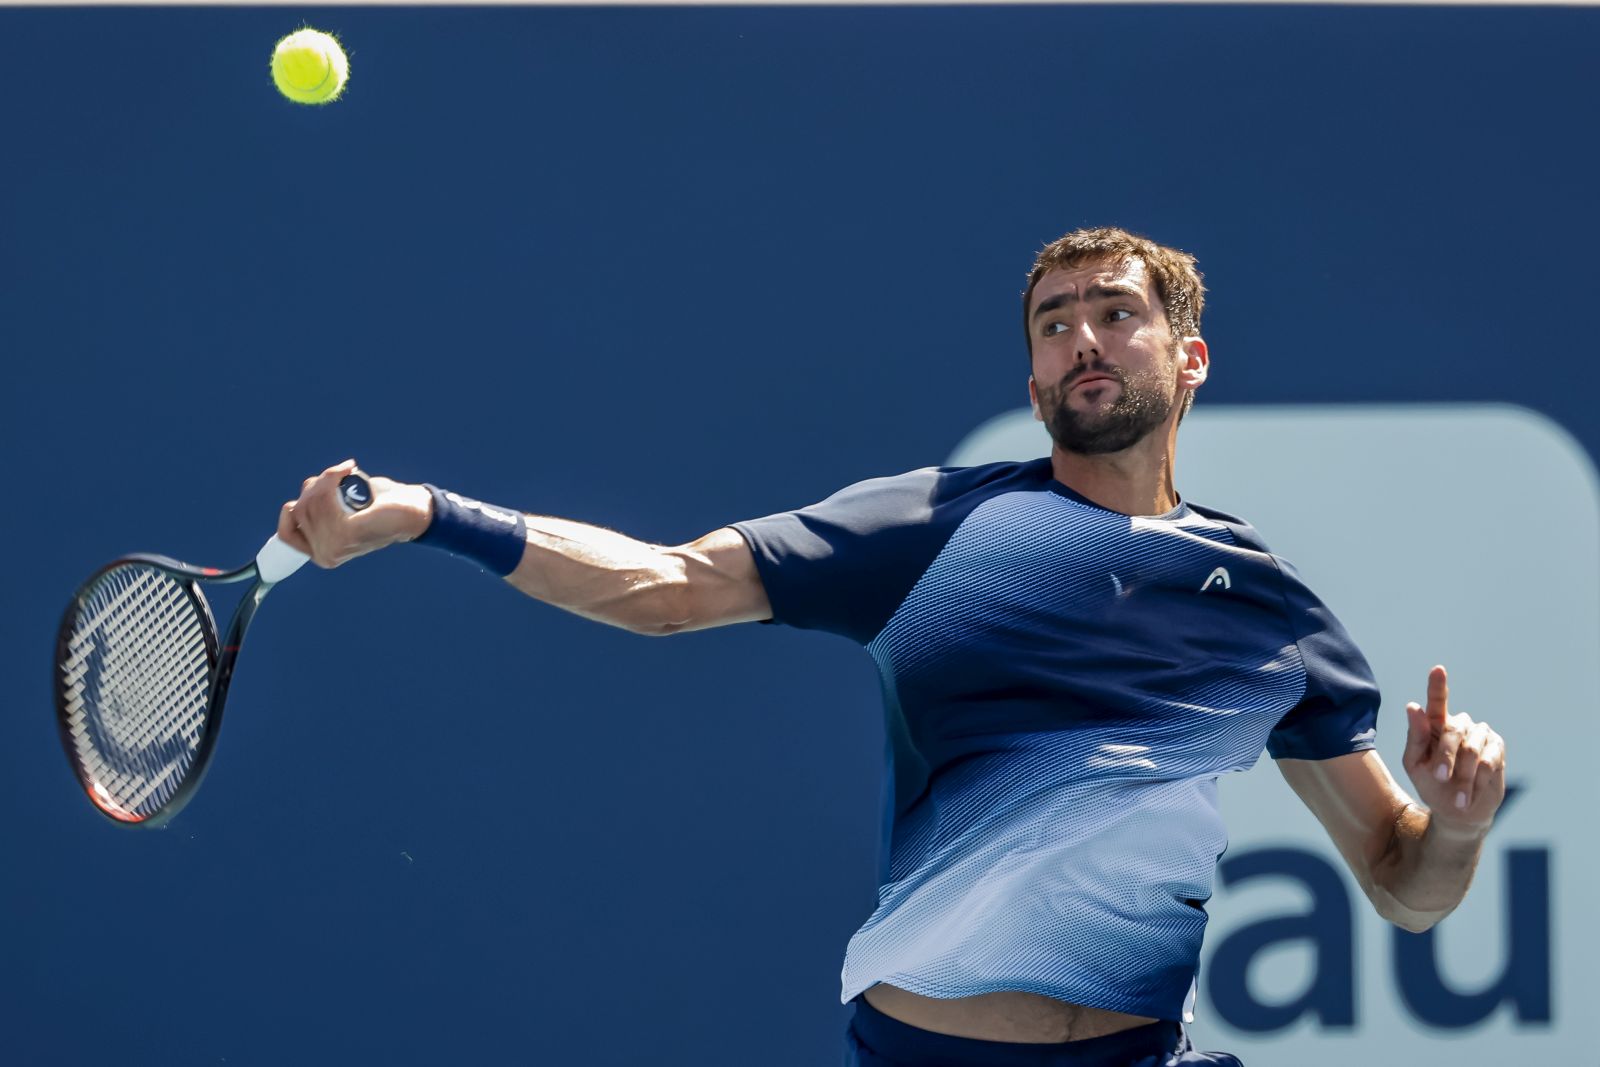 epa09856825 Marin Cilic of Croatia in action against Carlos Alcaraz of Spain  during a third round match of the Miami Open tennis tournament at Hard Rock Stadium in Miami Gardens, Florida, USA, 28 March 2022.  EPA/ERIK S. LESSER